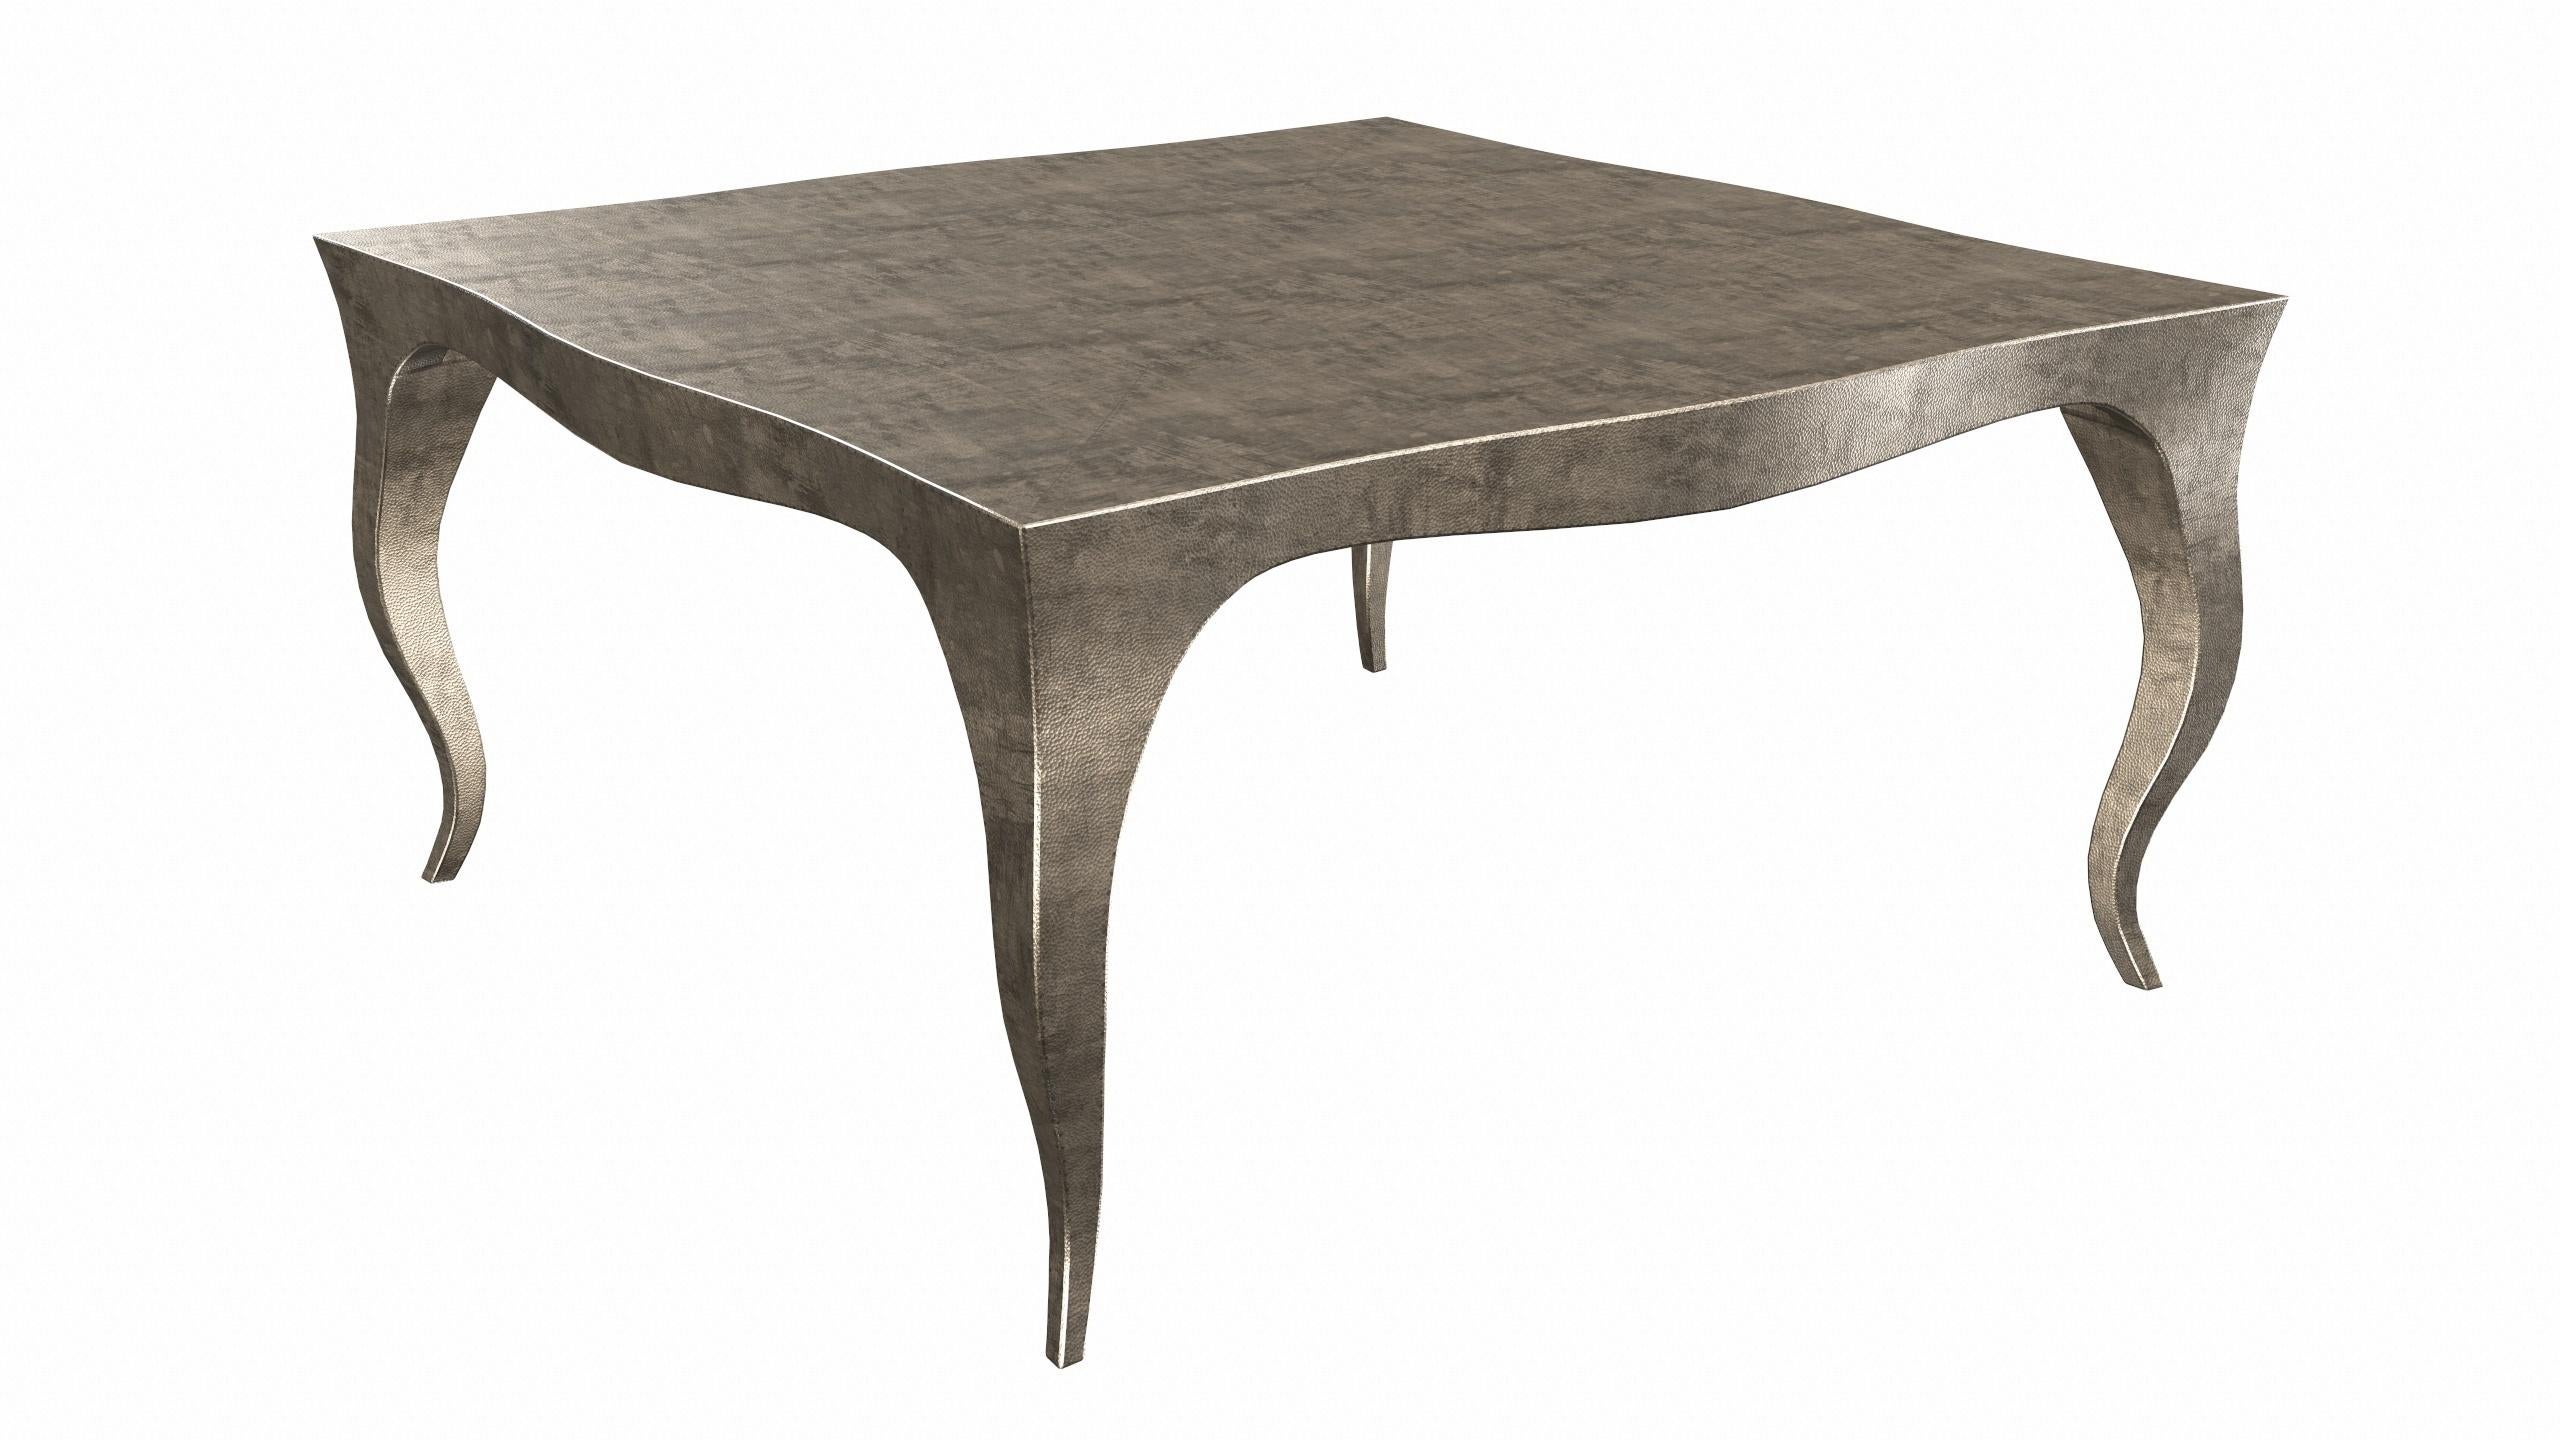 Contemporary Louise Art Deco Industrial Tables Mid. Hammered Antique Bronze 18.5x18.5x10 Inch For Sale